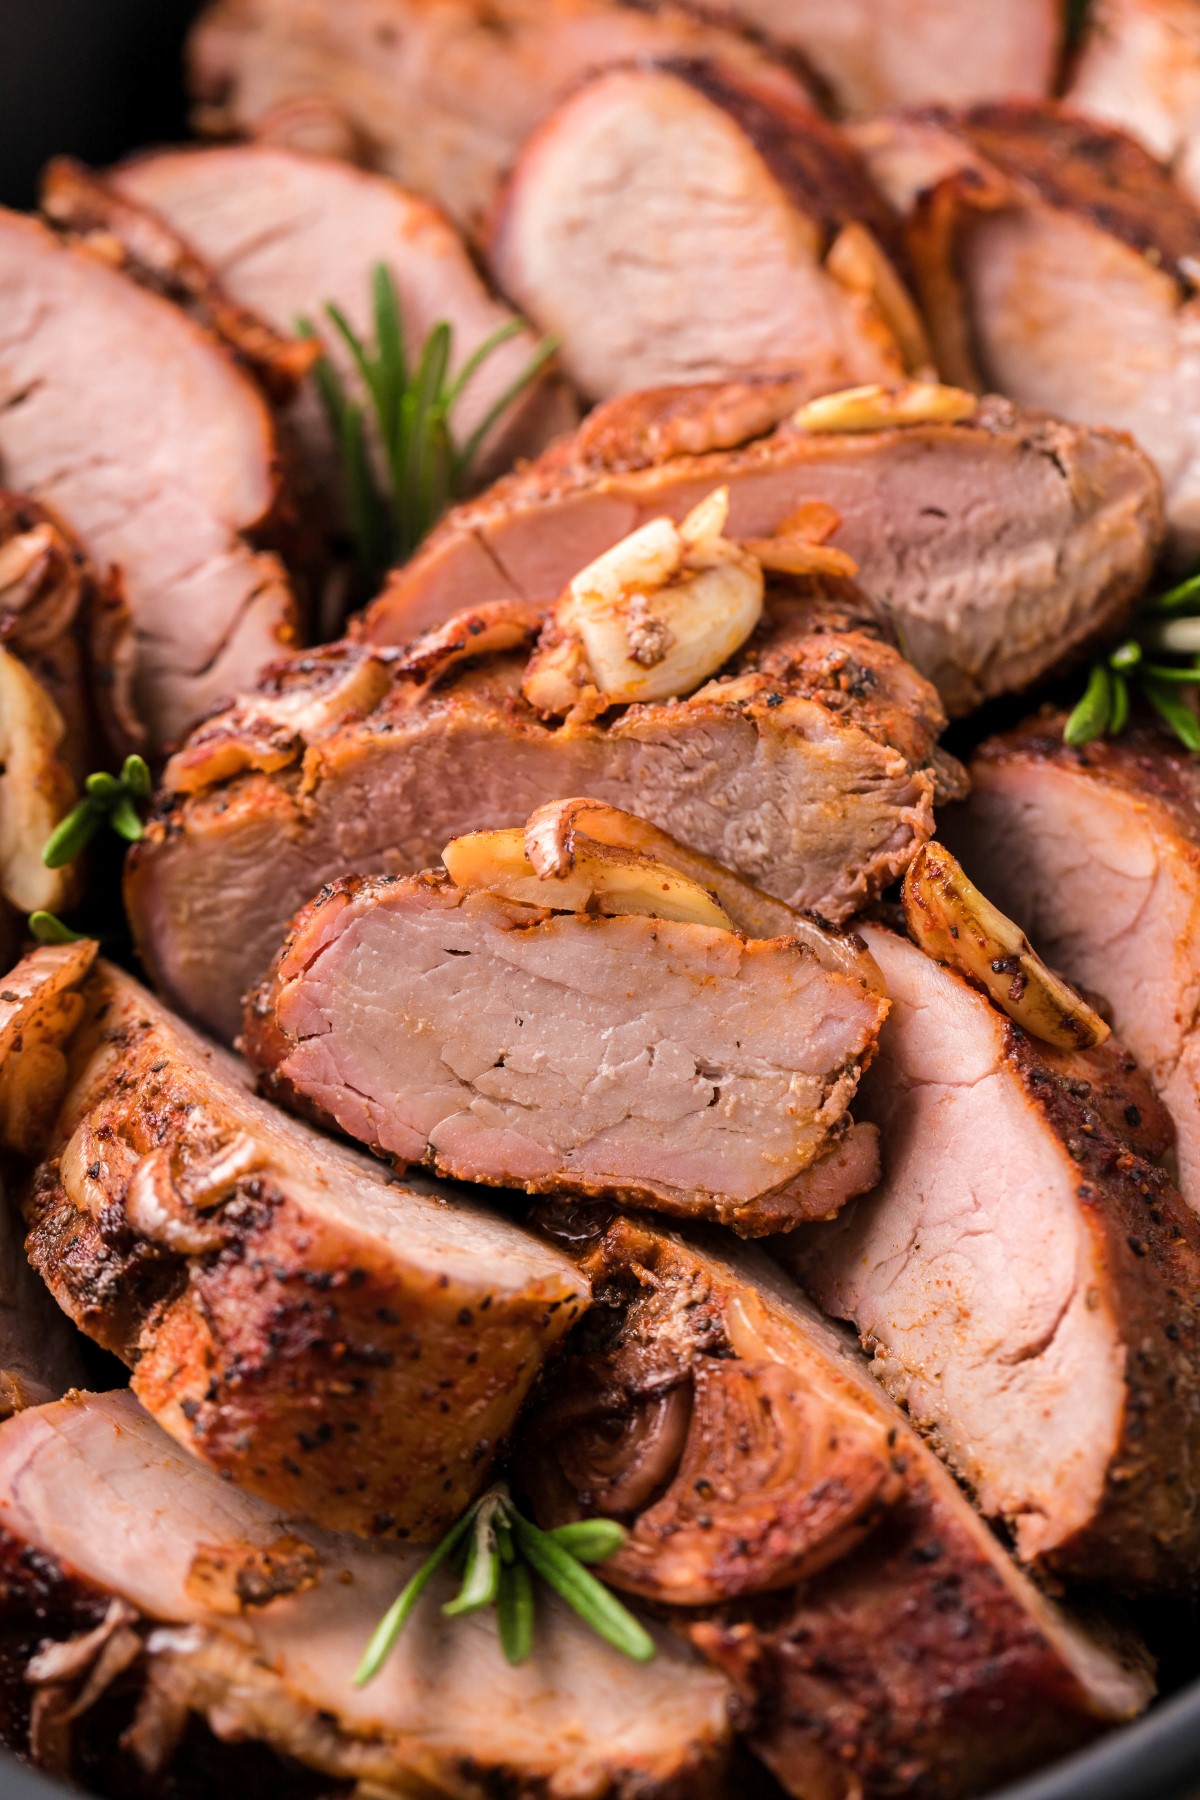 Slices of pork tenderloin with roasted garlic cloves, roasted shallots, and fresh rosemary.